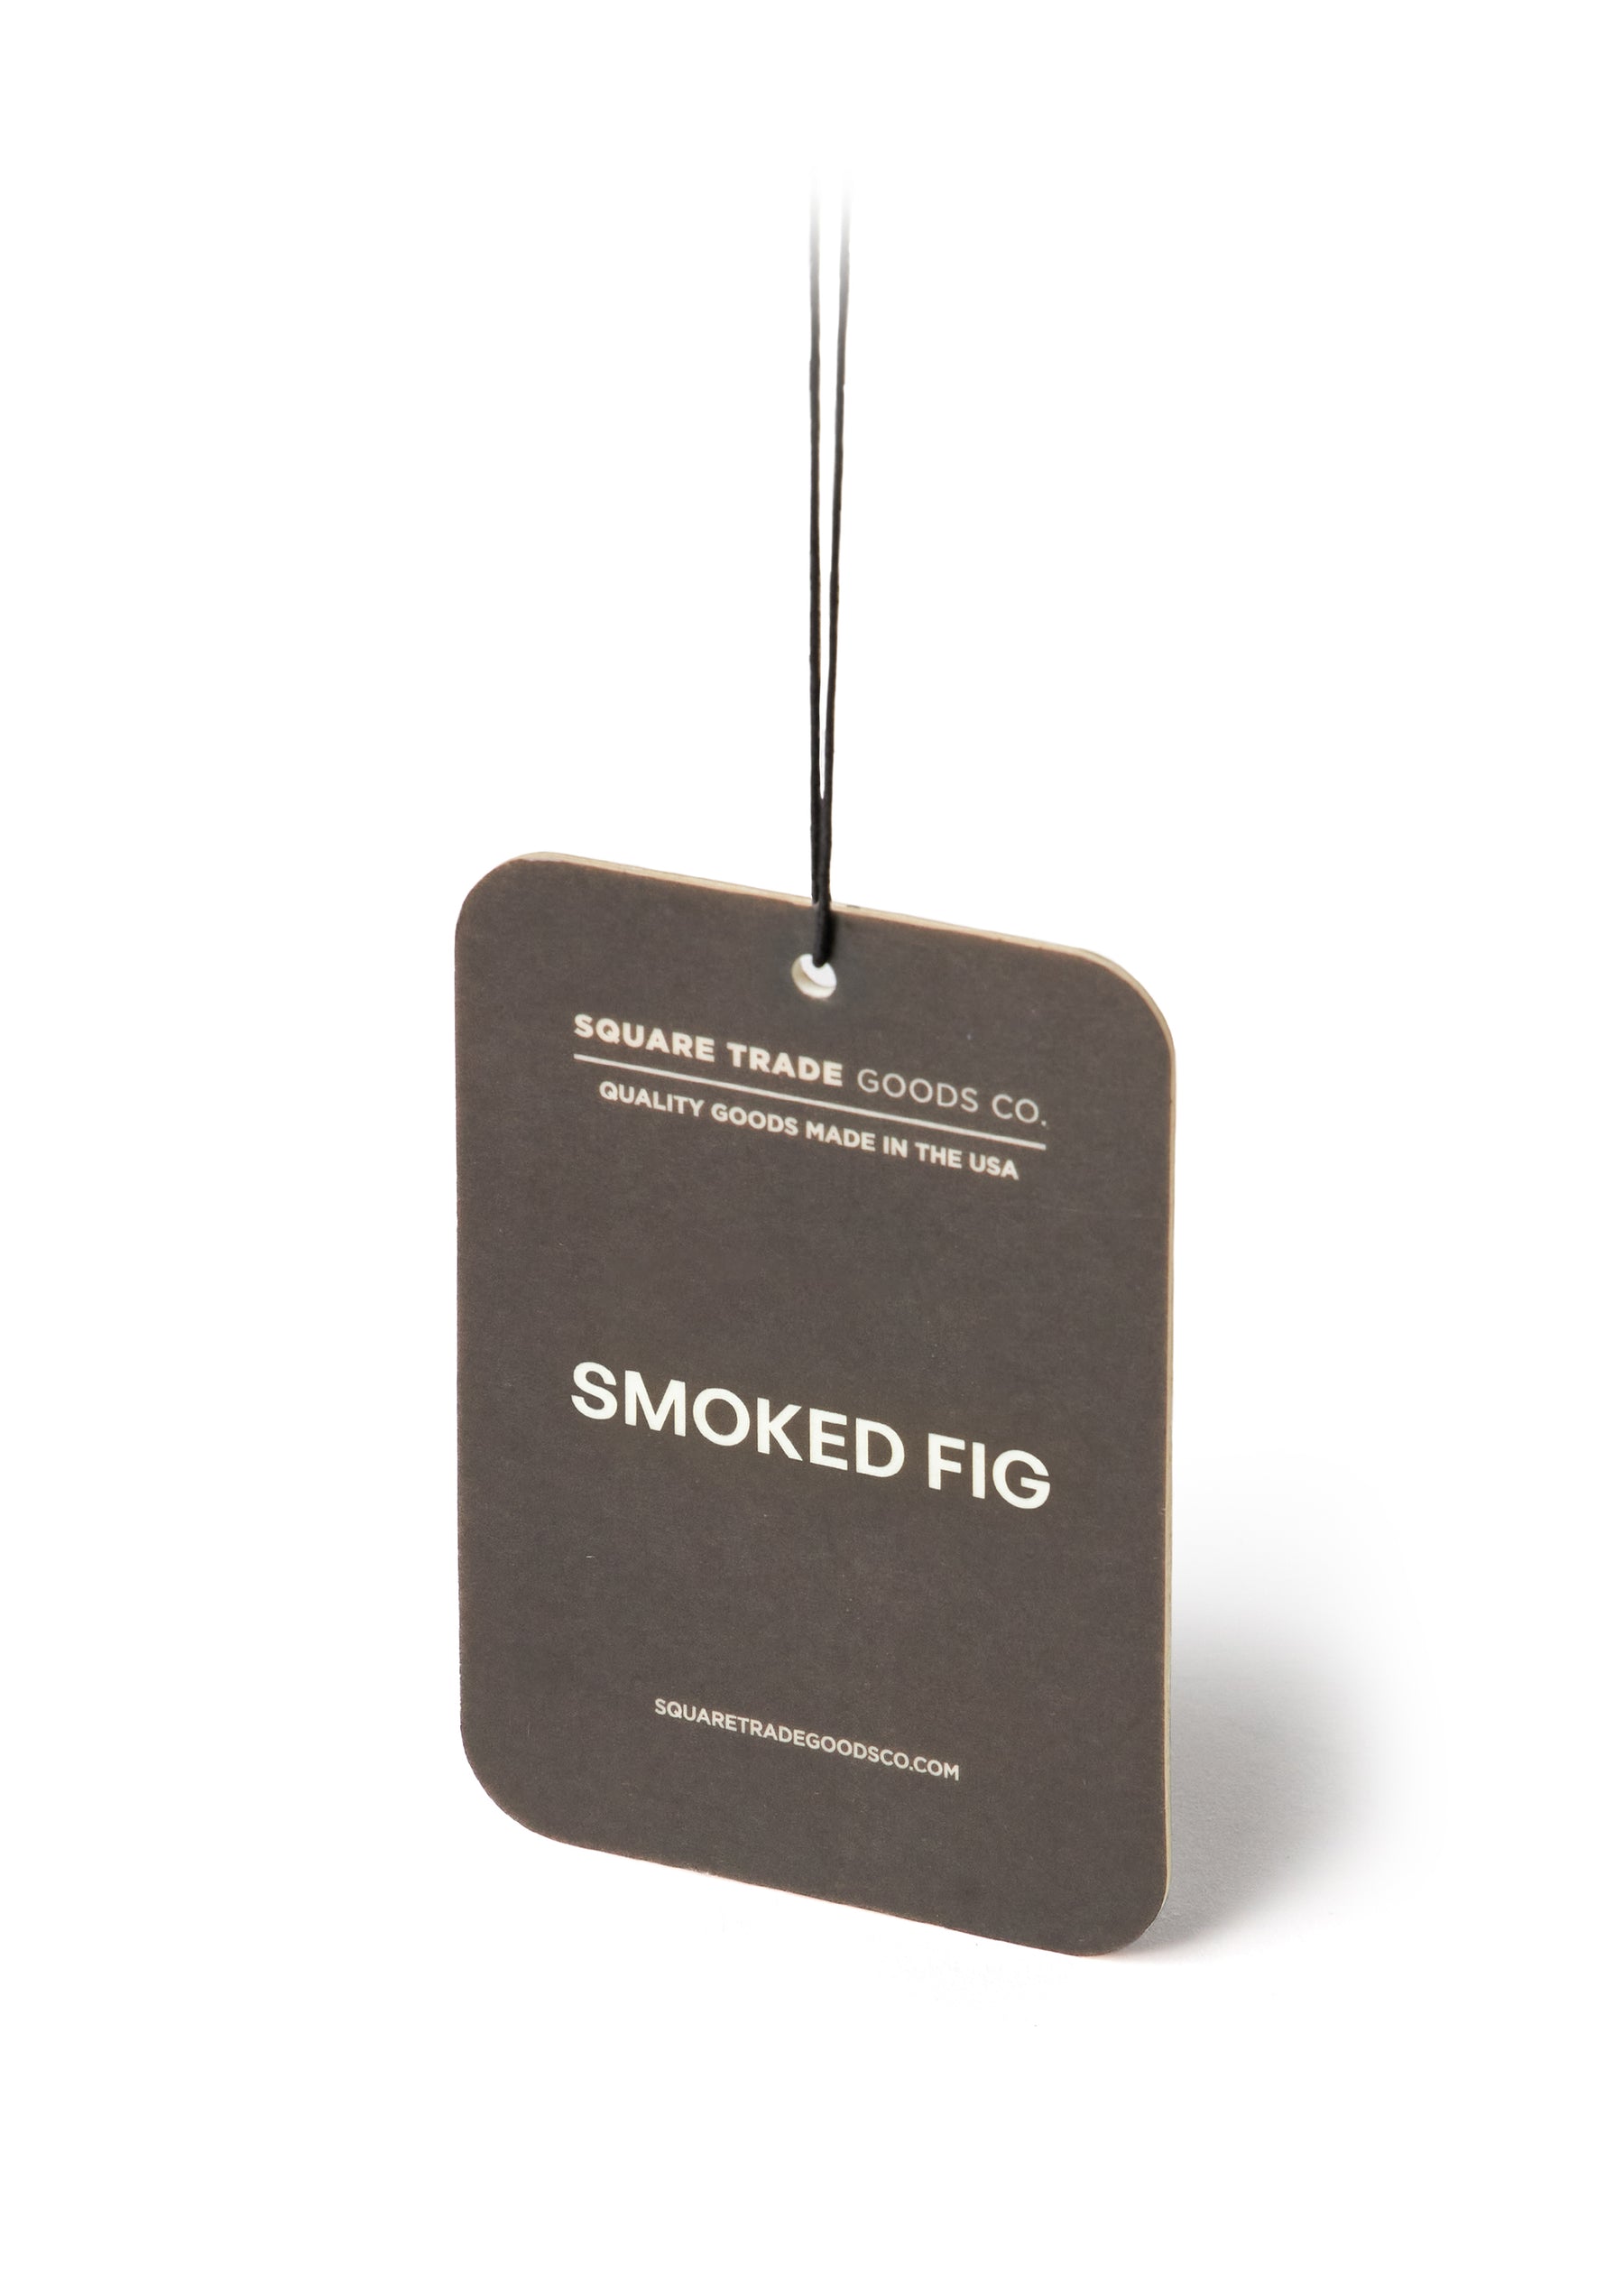 Smoked Fig Fragrance Cards - Square Trade Goods Co. - Bluecashew Kitchen Homestead